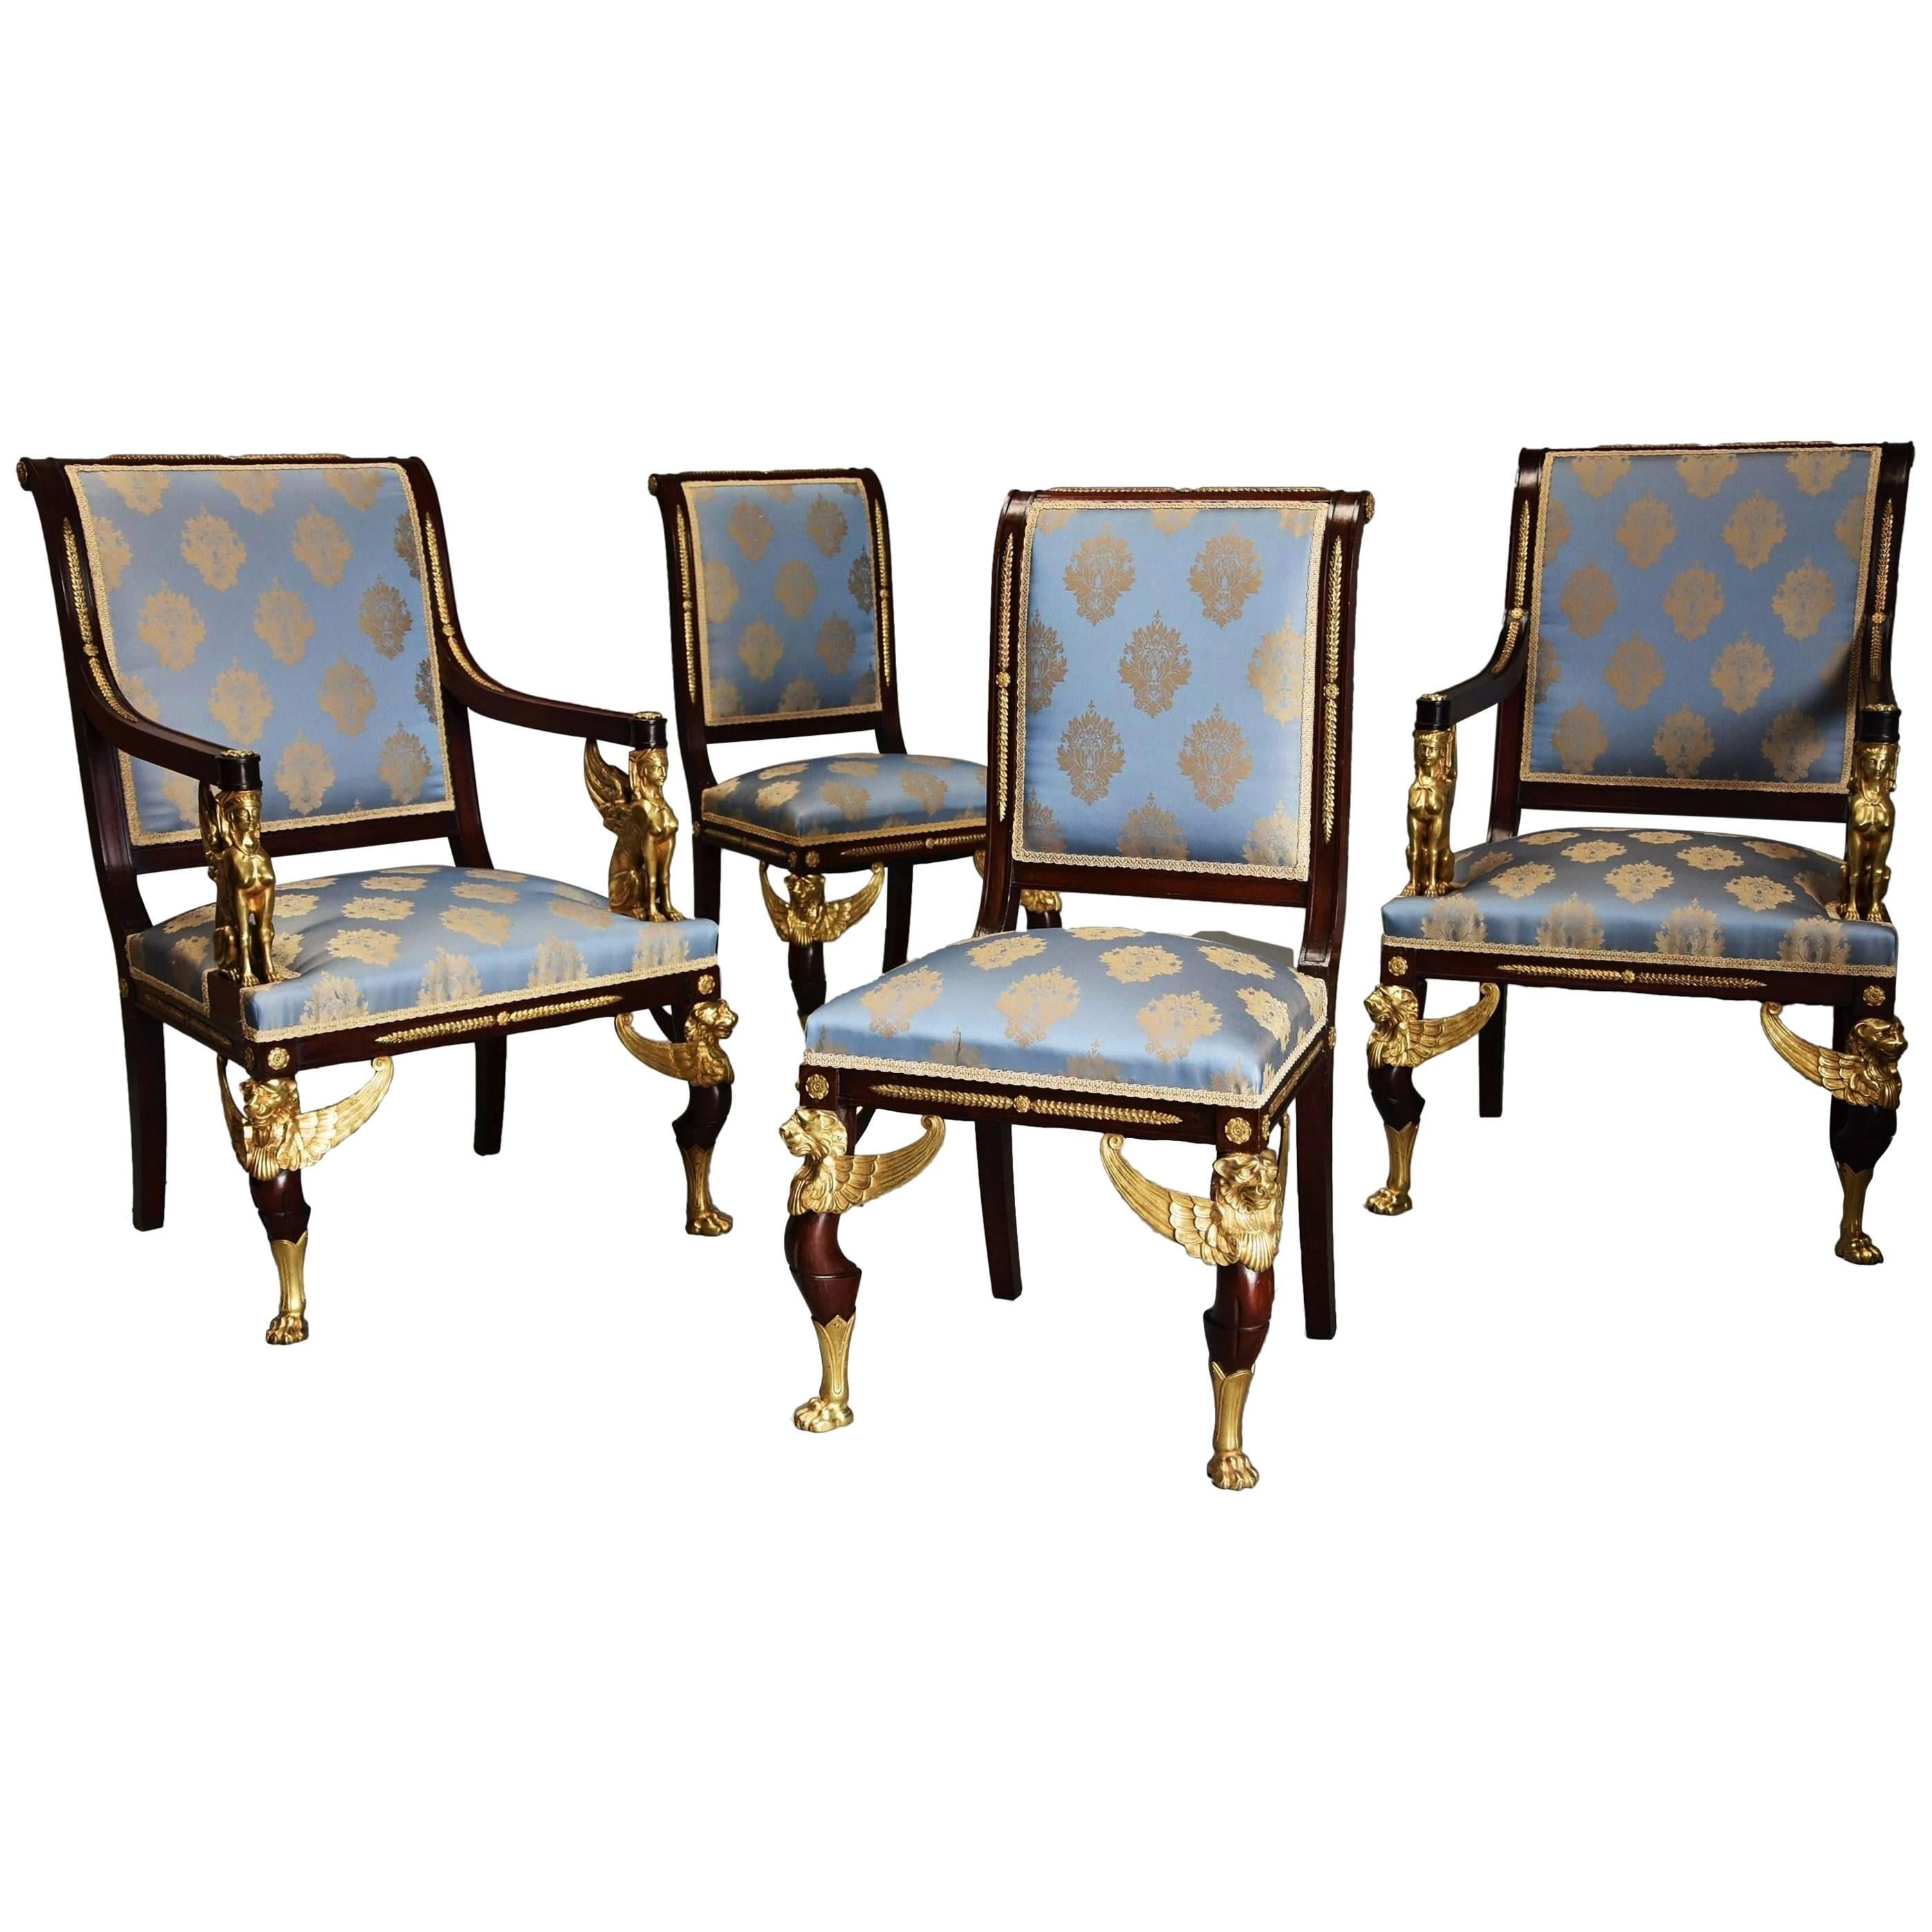 Late 19th Century Set of Four English Mahogany Chairs in the French Empire Style For Sale